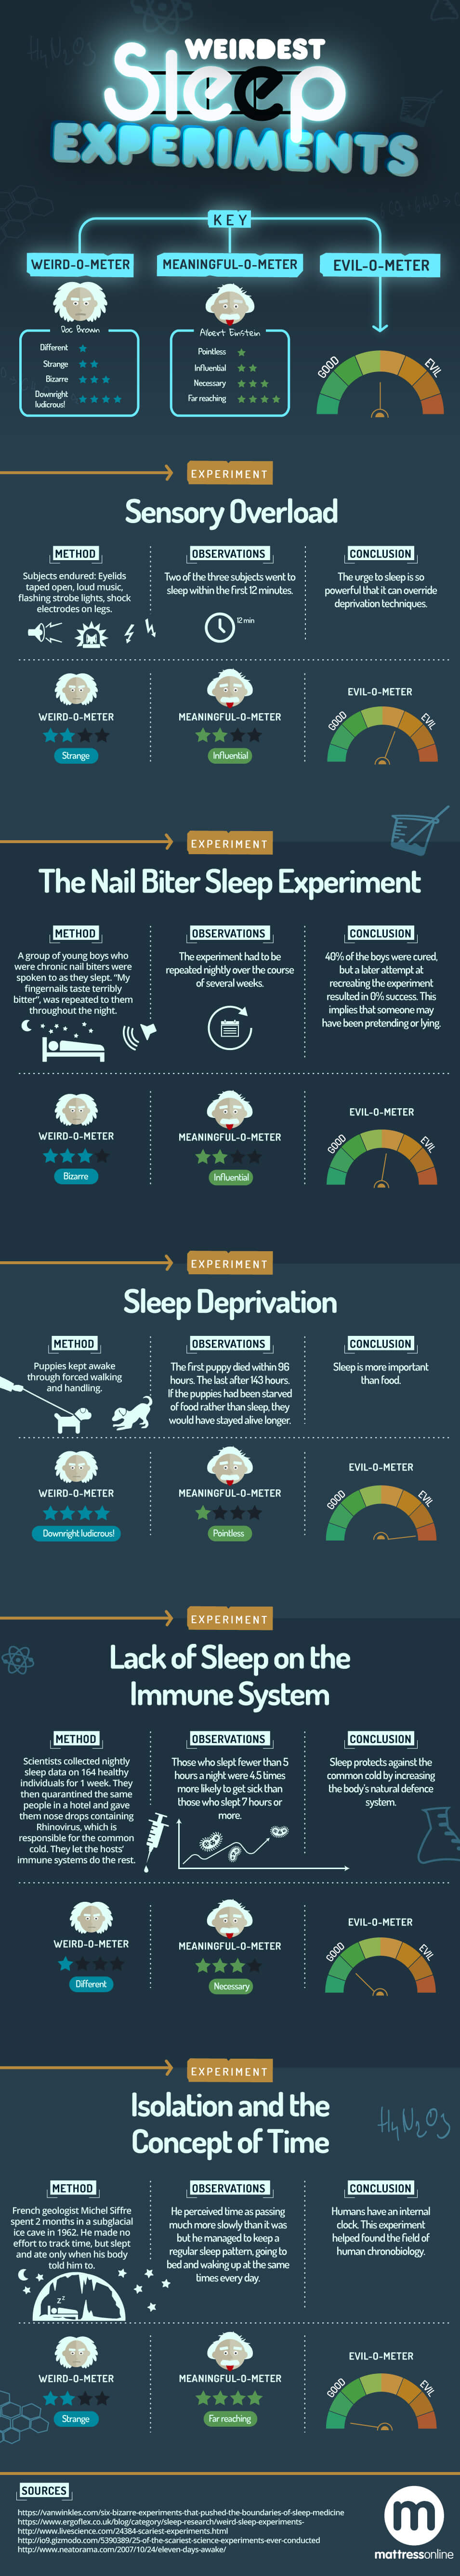 5 Weird Sleep Experiments You Shouldn’t Try At Home [Infographic]